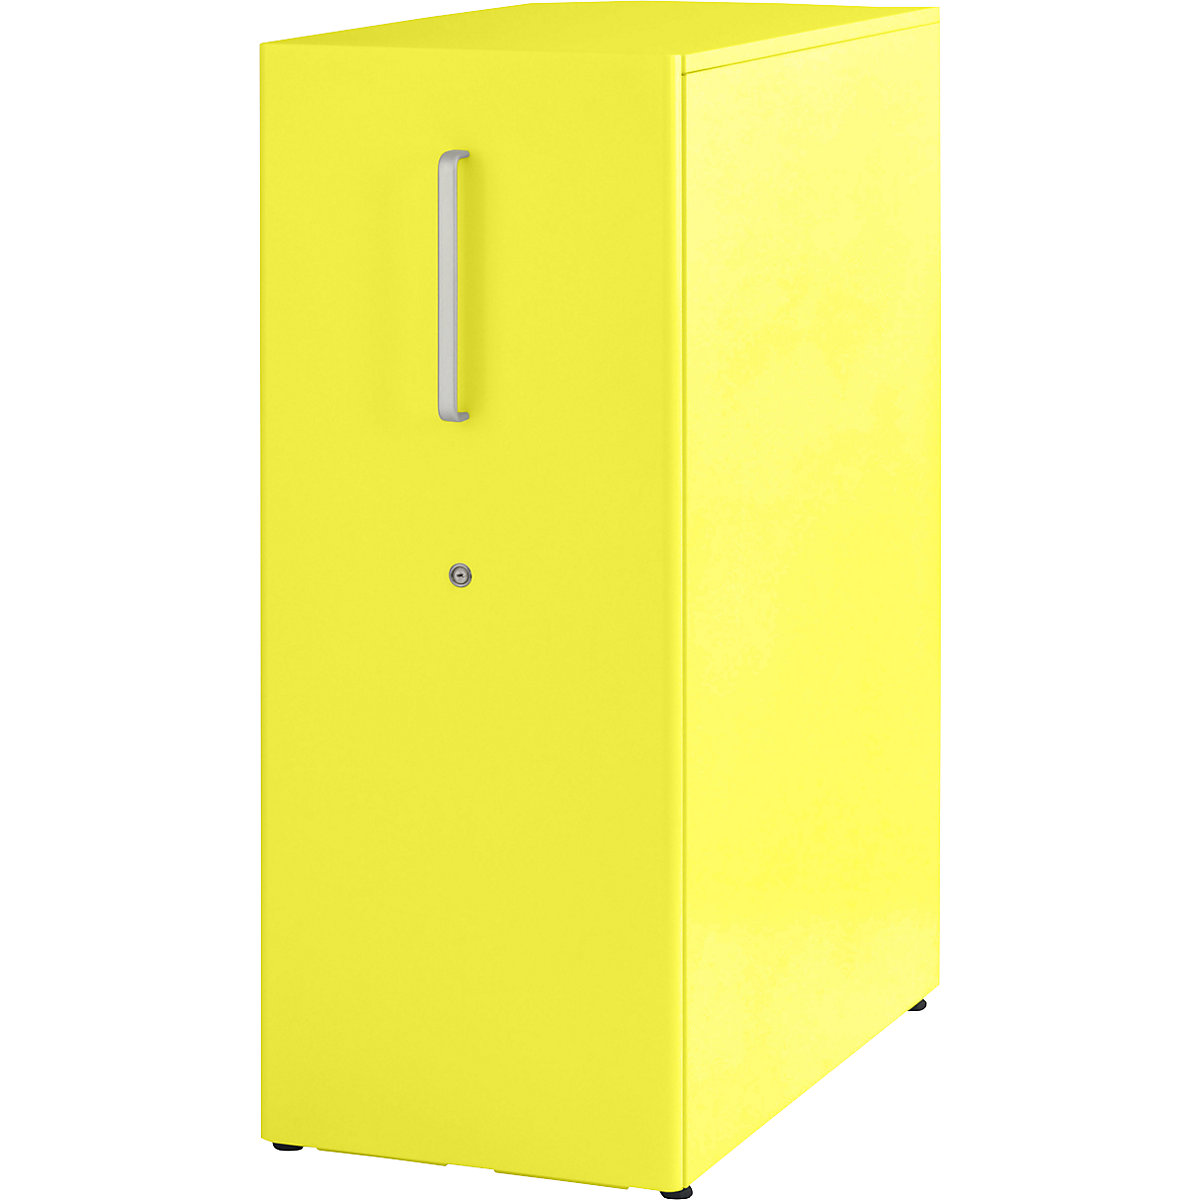 Tower™ 3 add-on furniture, with worktop – BISLEY, for the right side, 3 shelves, zinc yellow-20